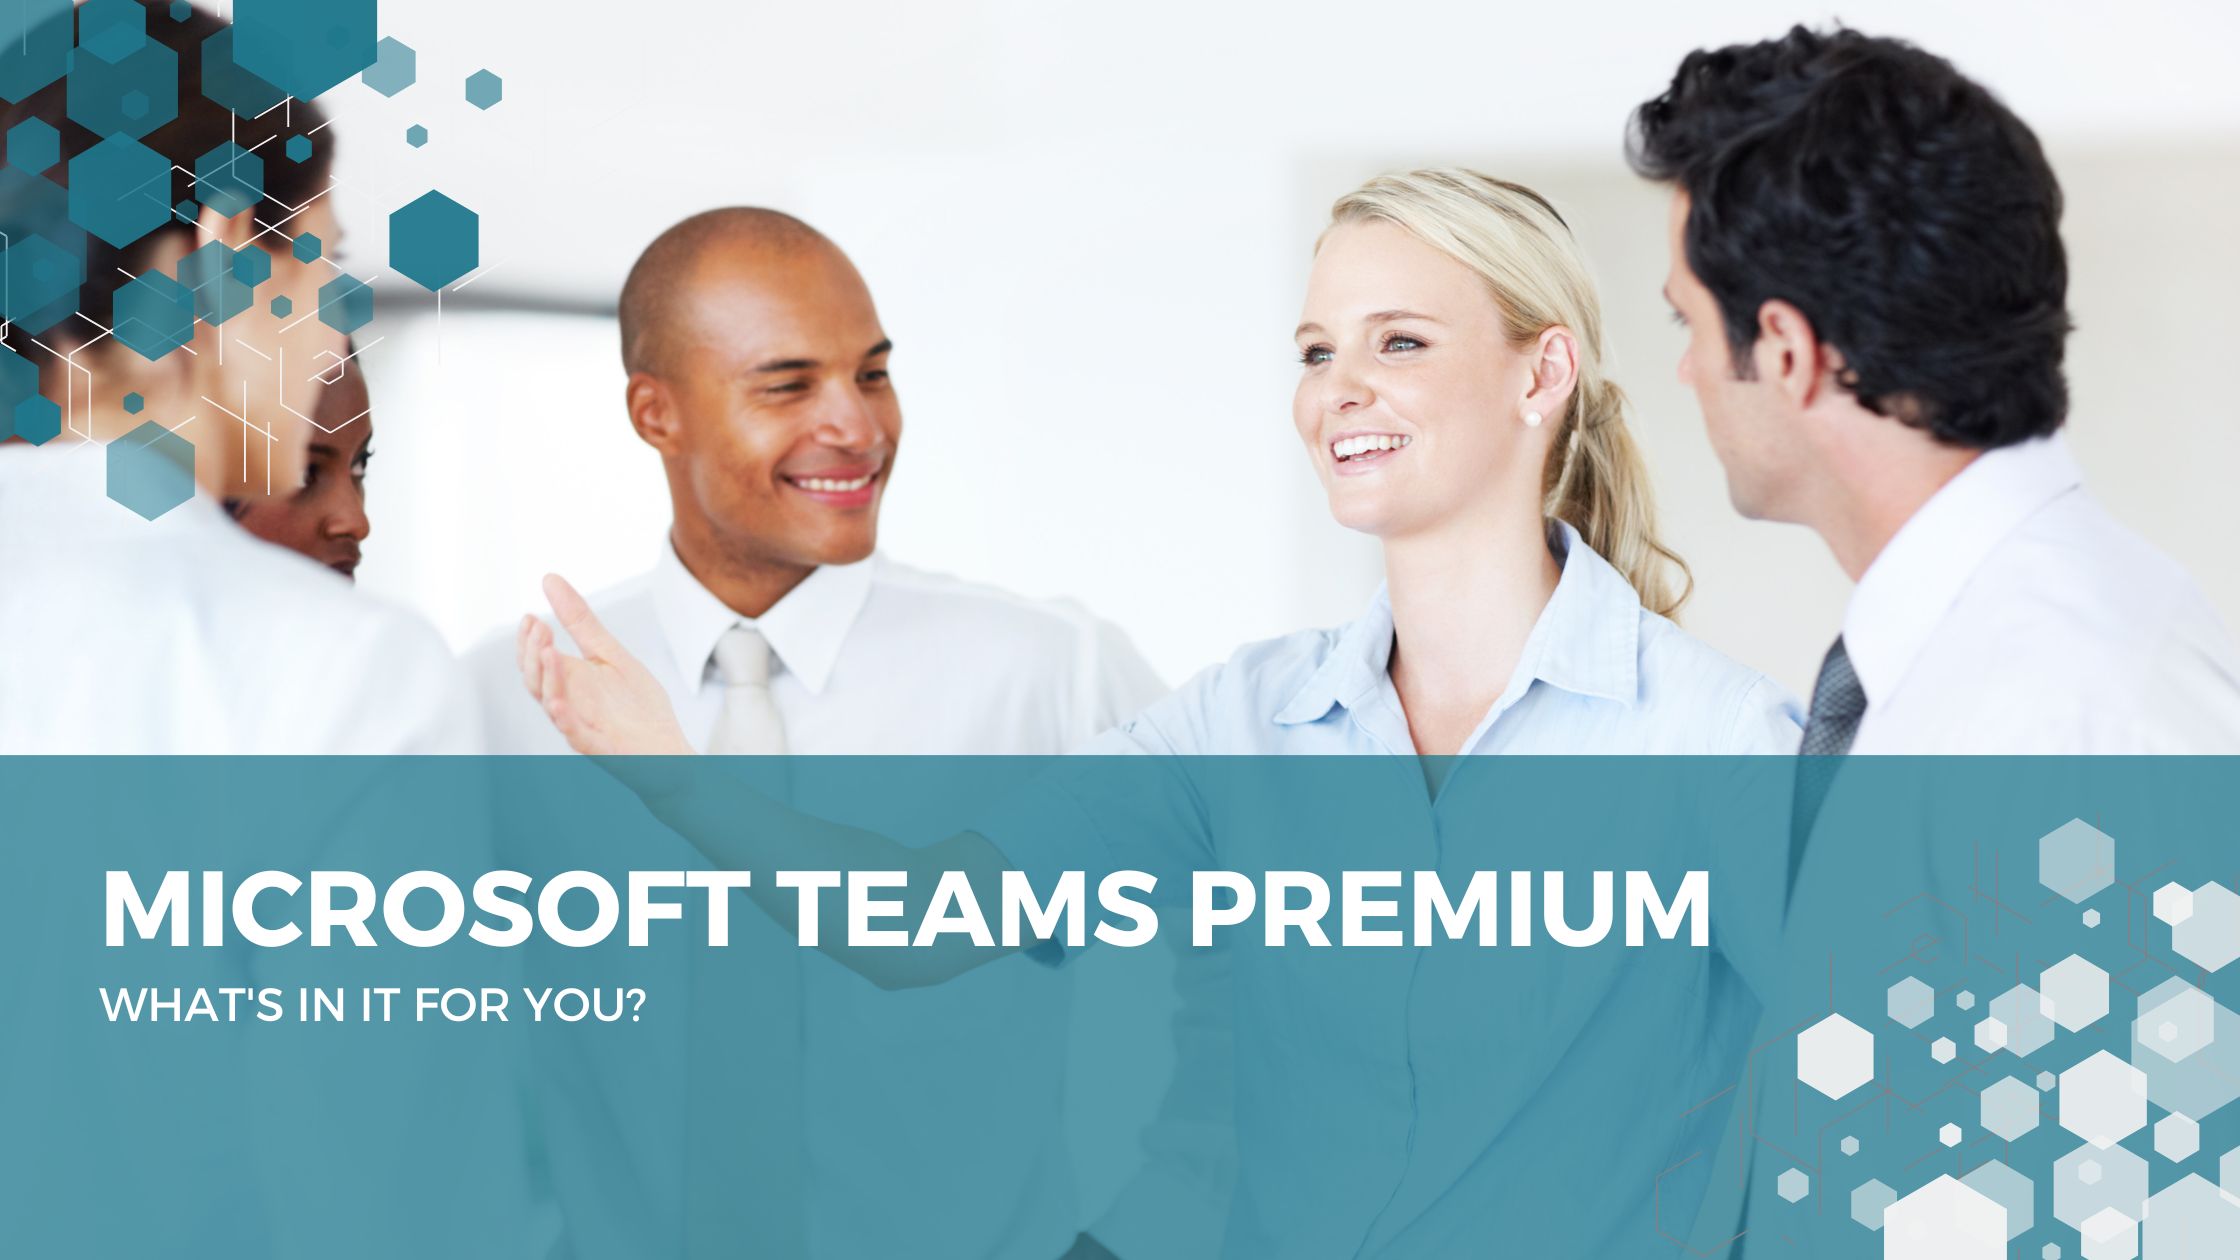 Microsoft Teams Premium | What’s in it for you?